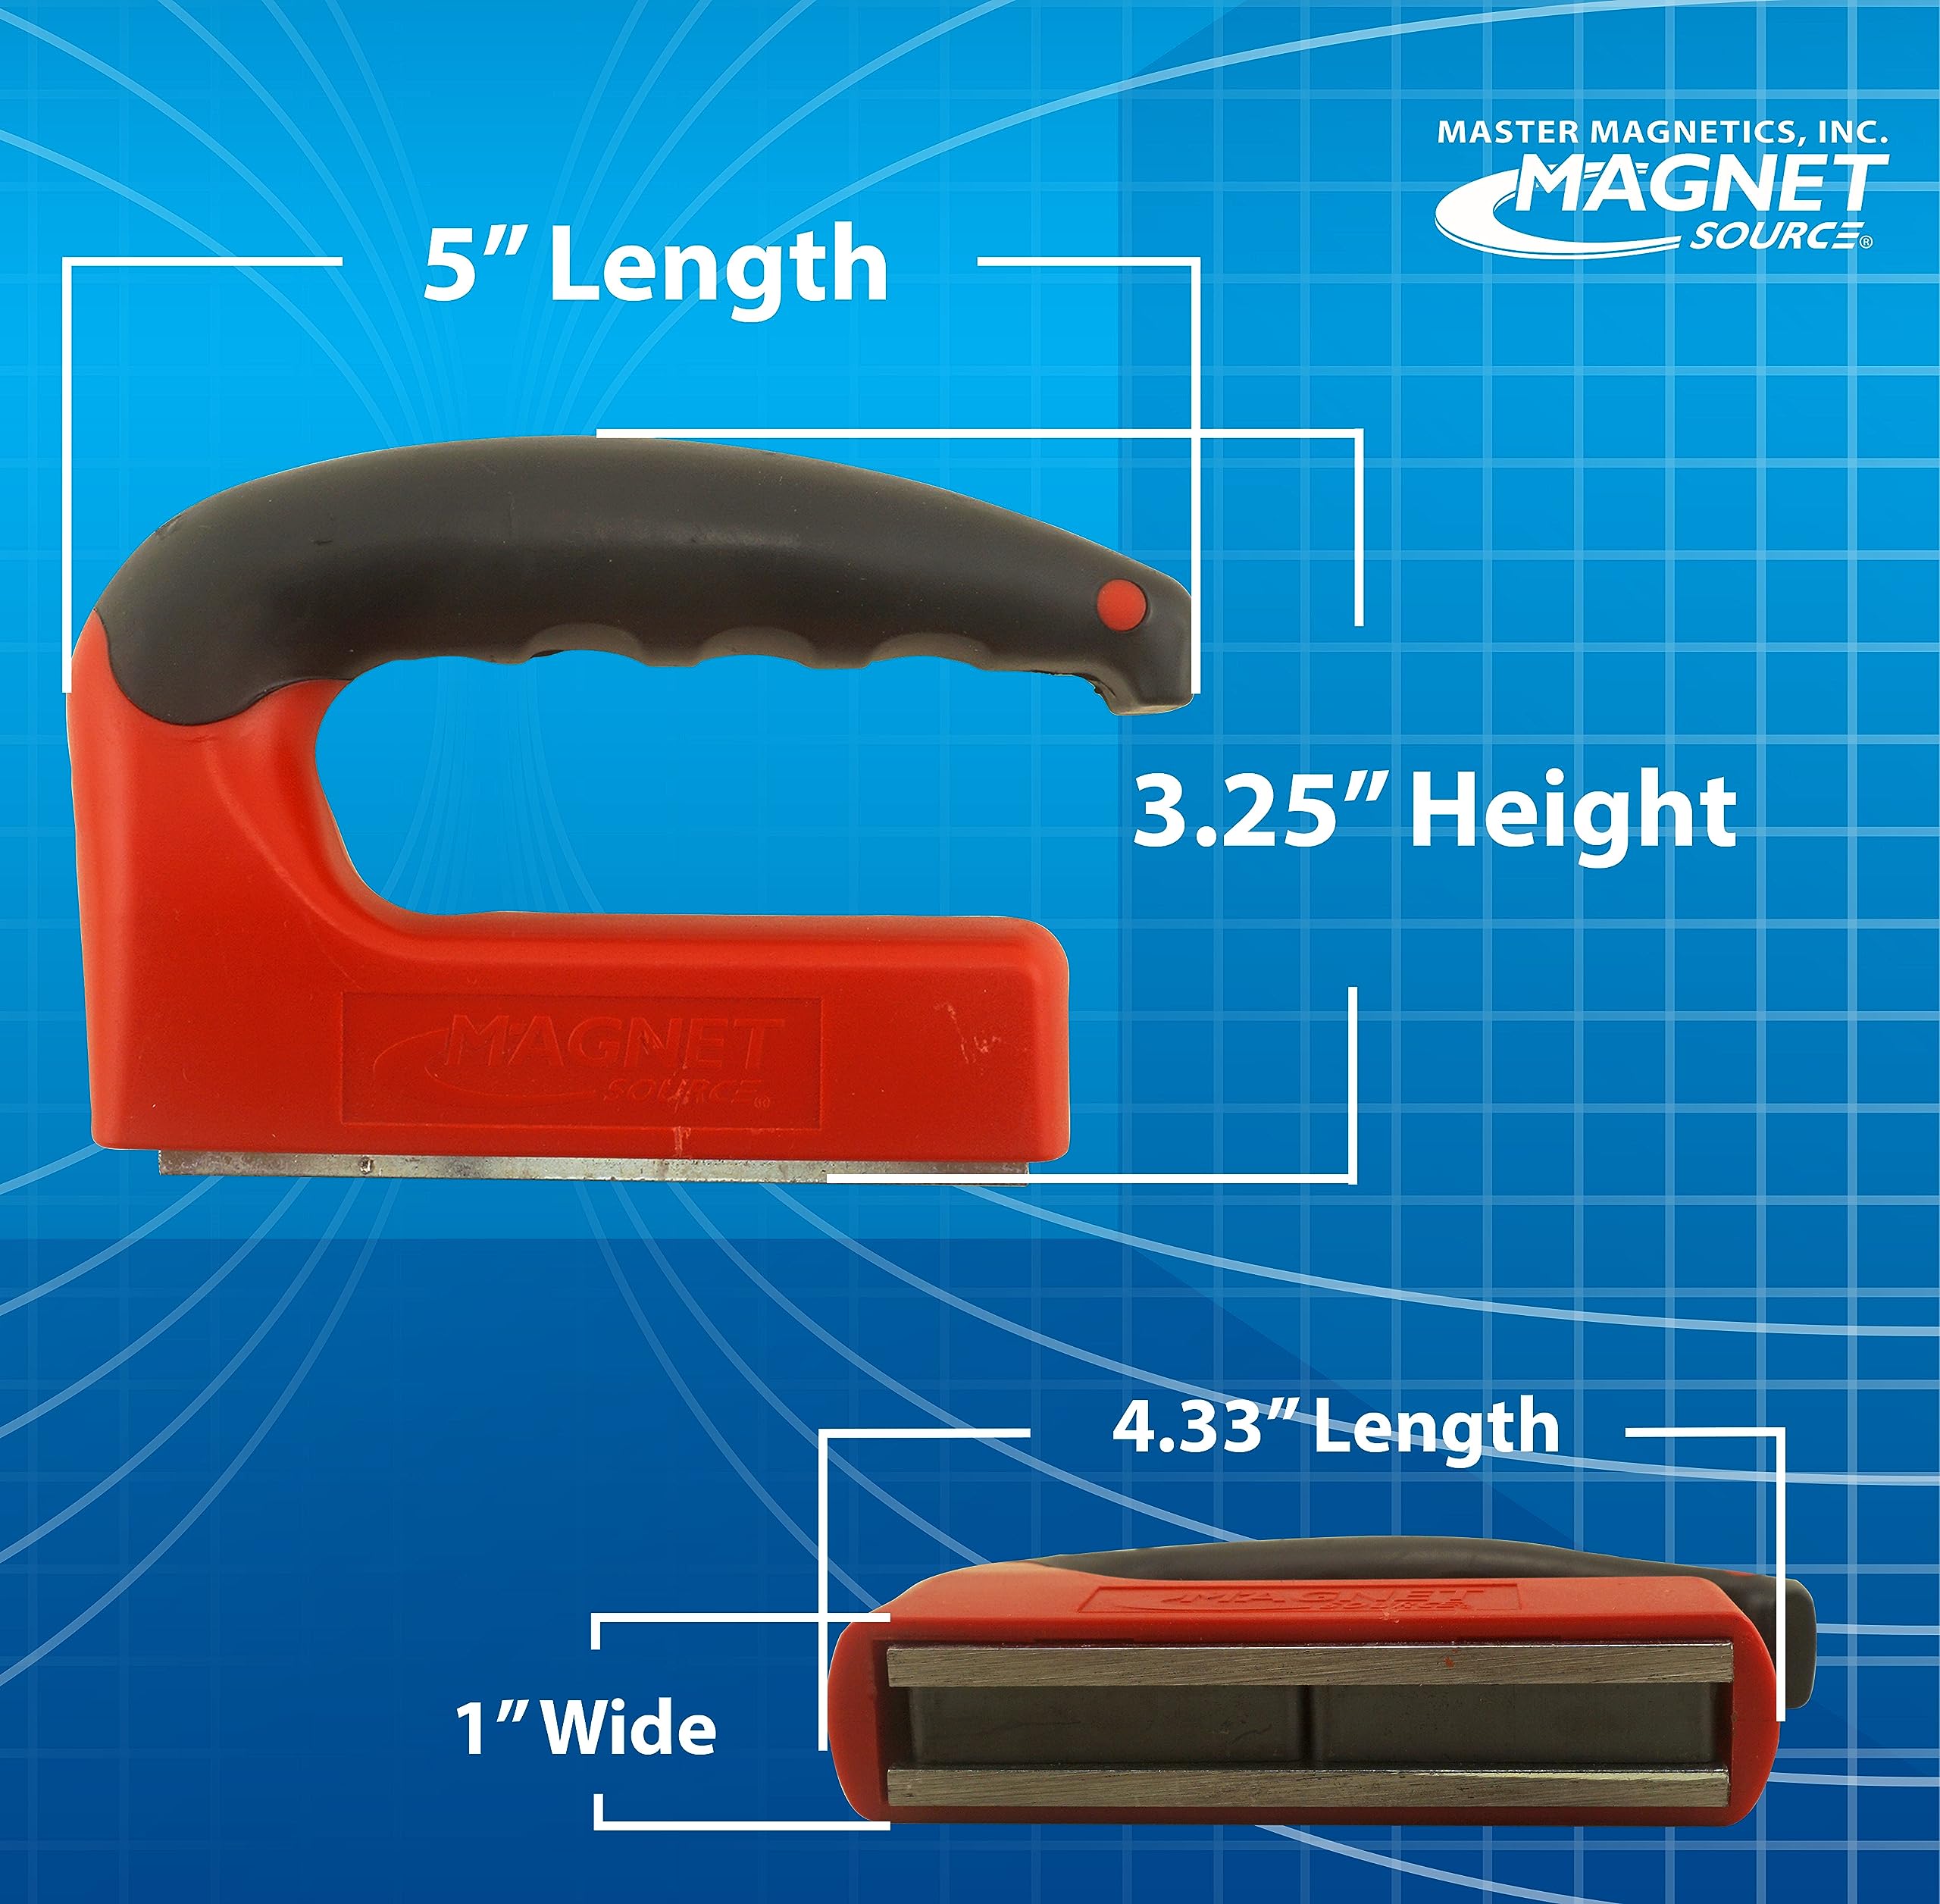 Master Magnetics Strong Magnet | Powerful Magnet with Ergonomic Handle | 100 lb Pull Force | 07501 , Red